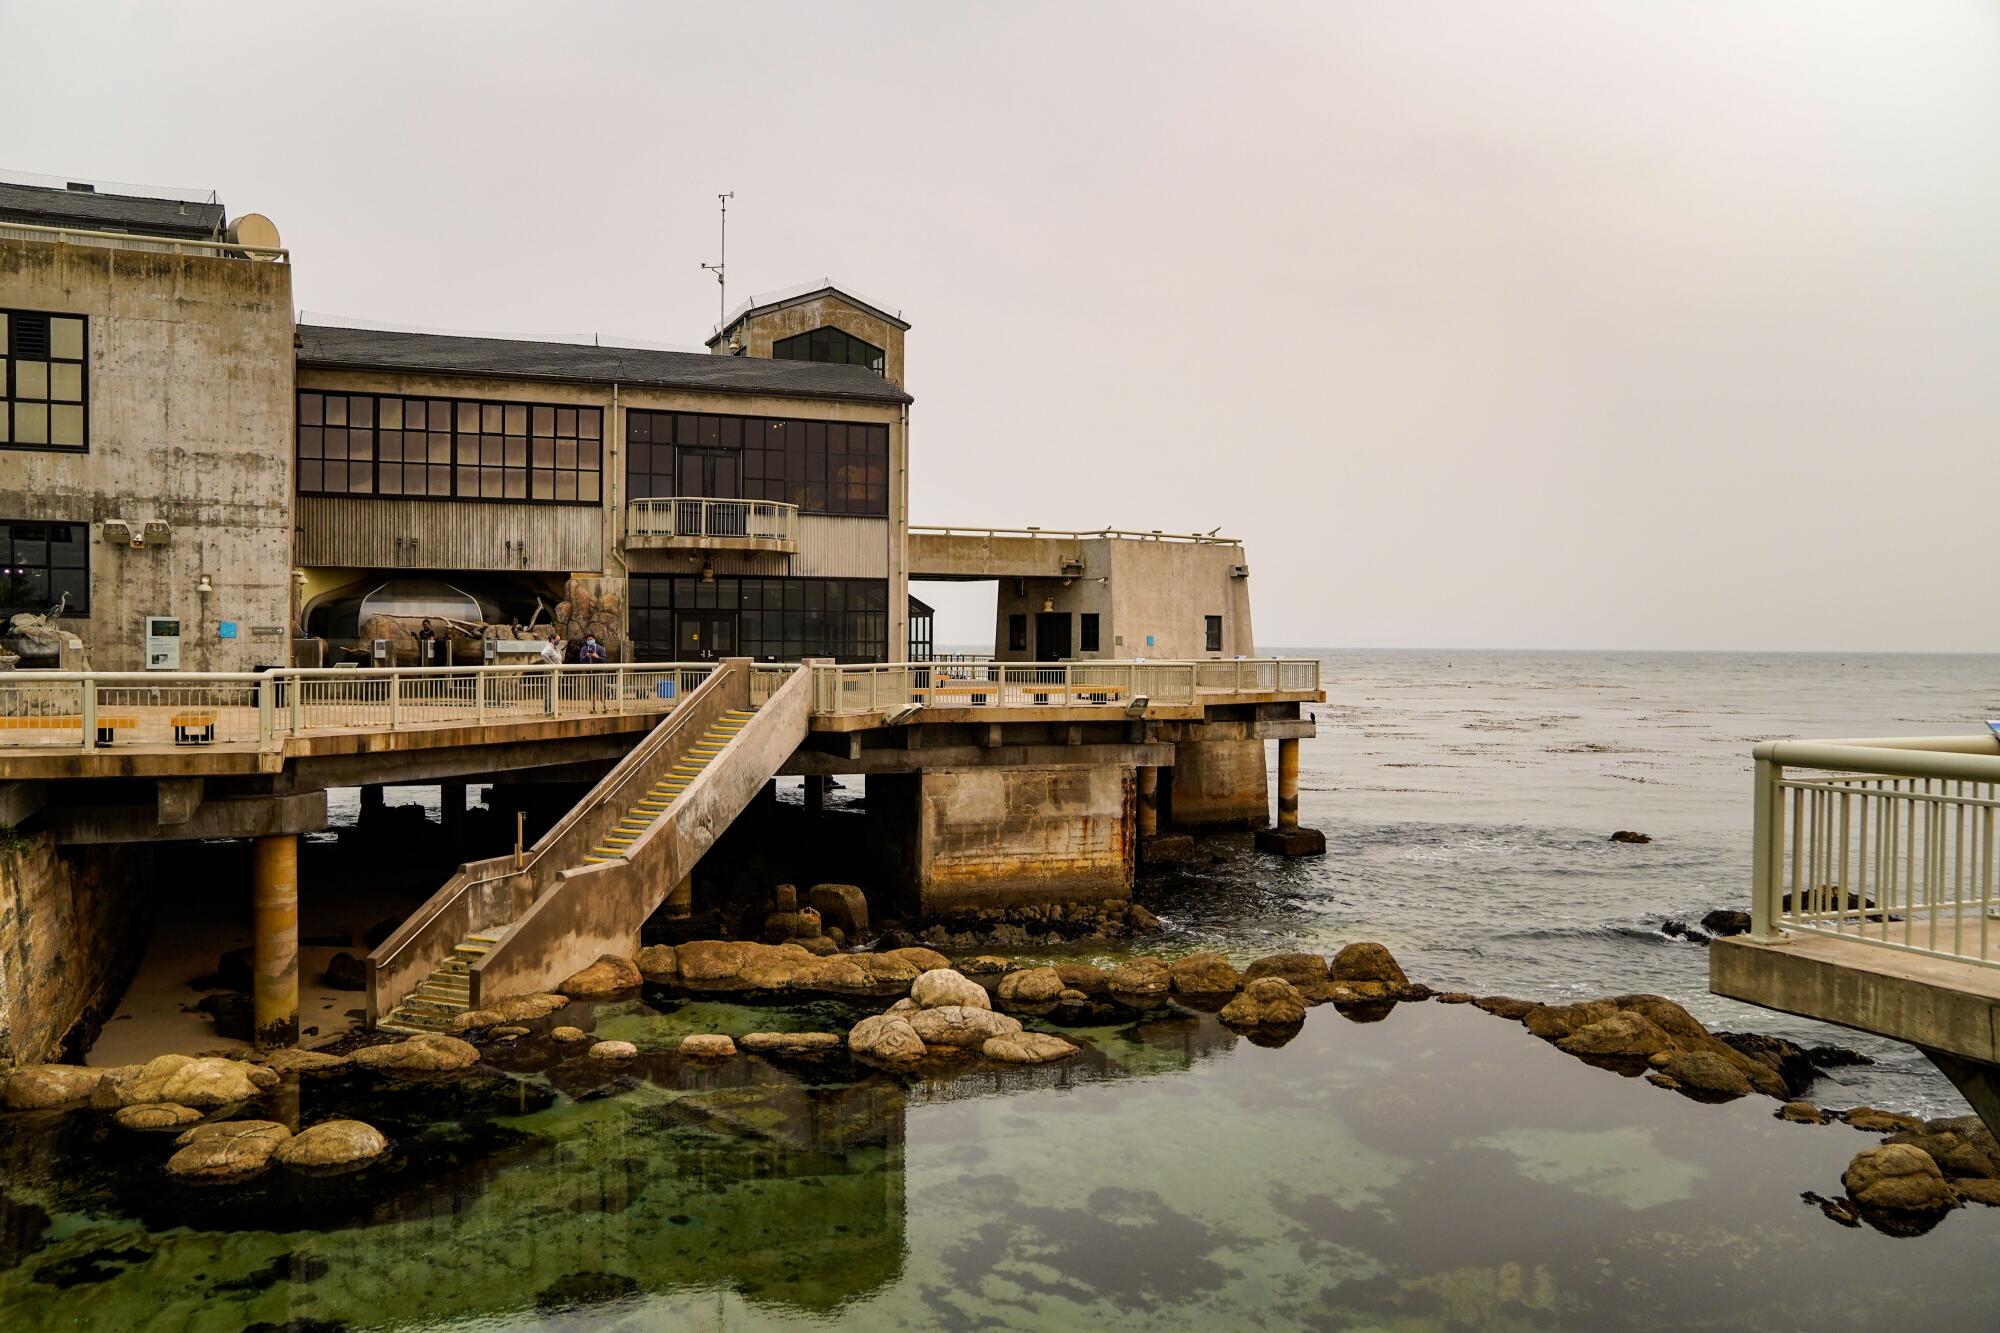 The old, weathered building housing Monterey Bay Aquarium on Cannery Row looks out over the water